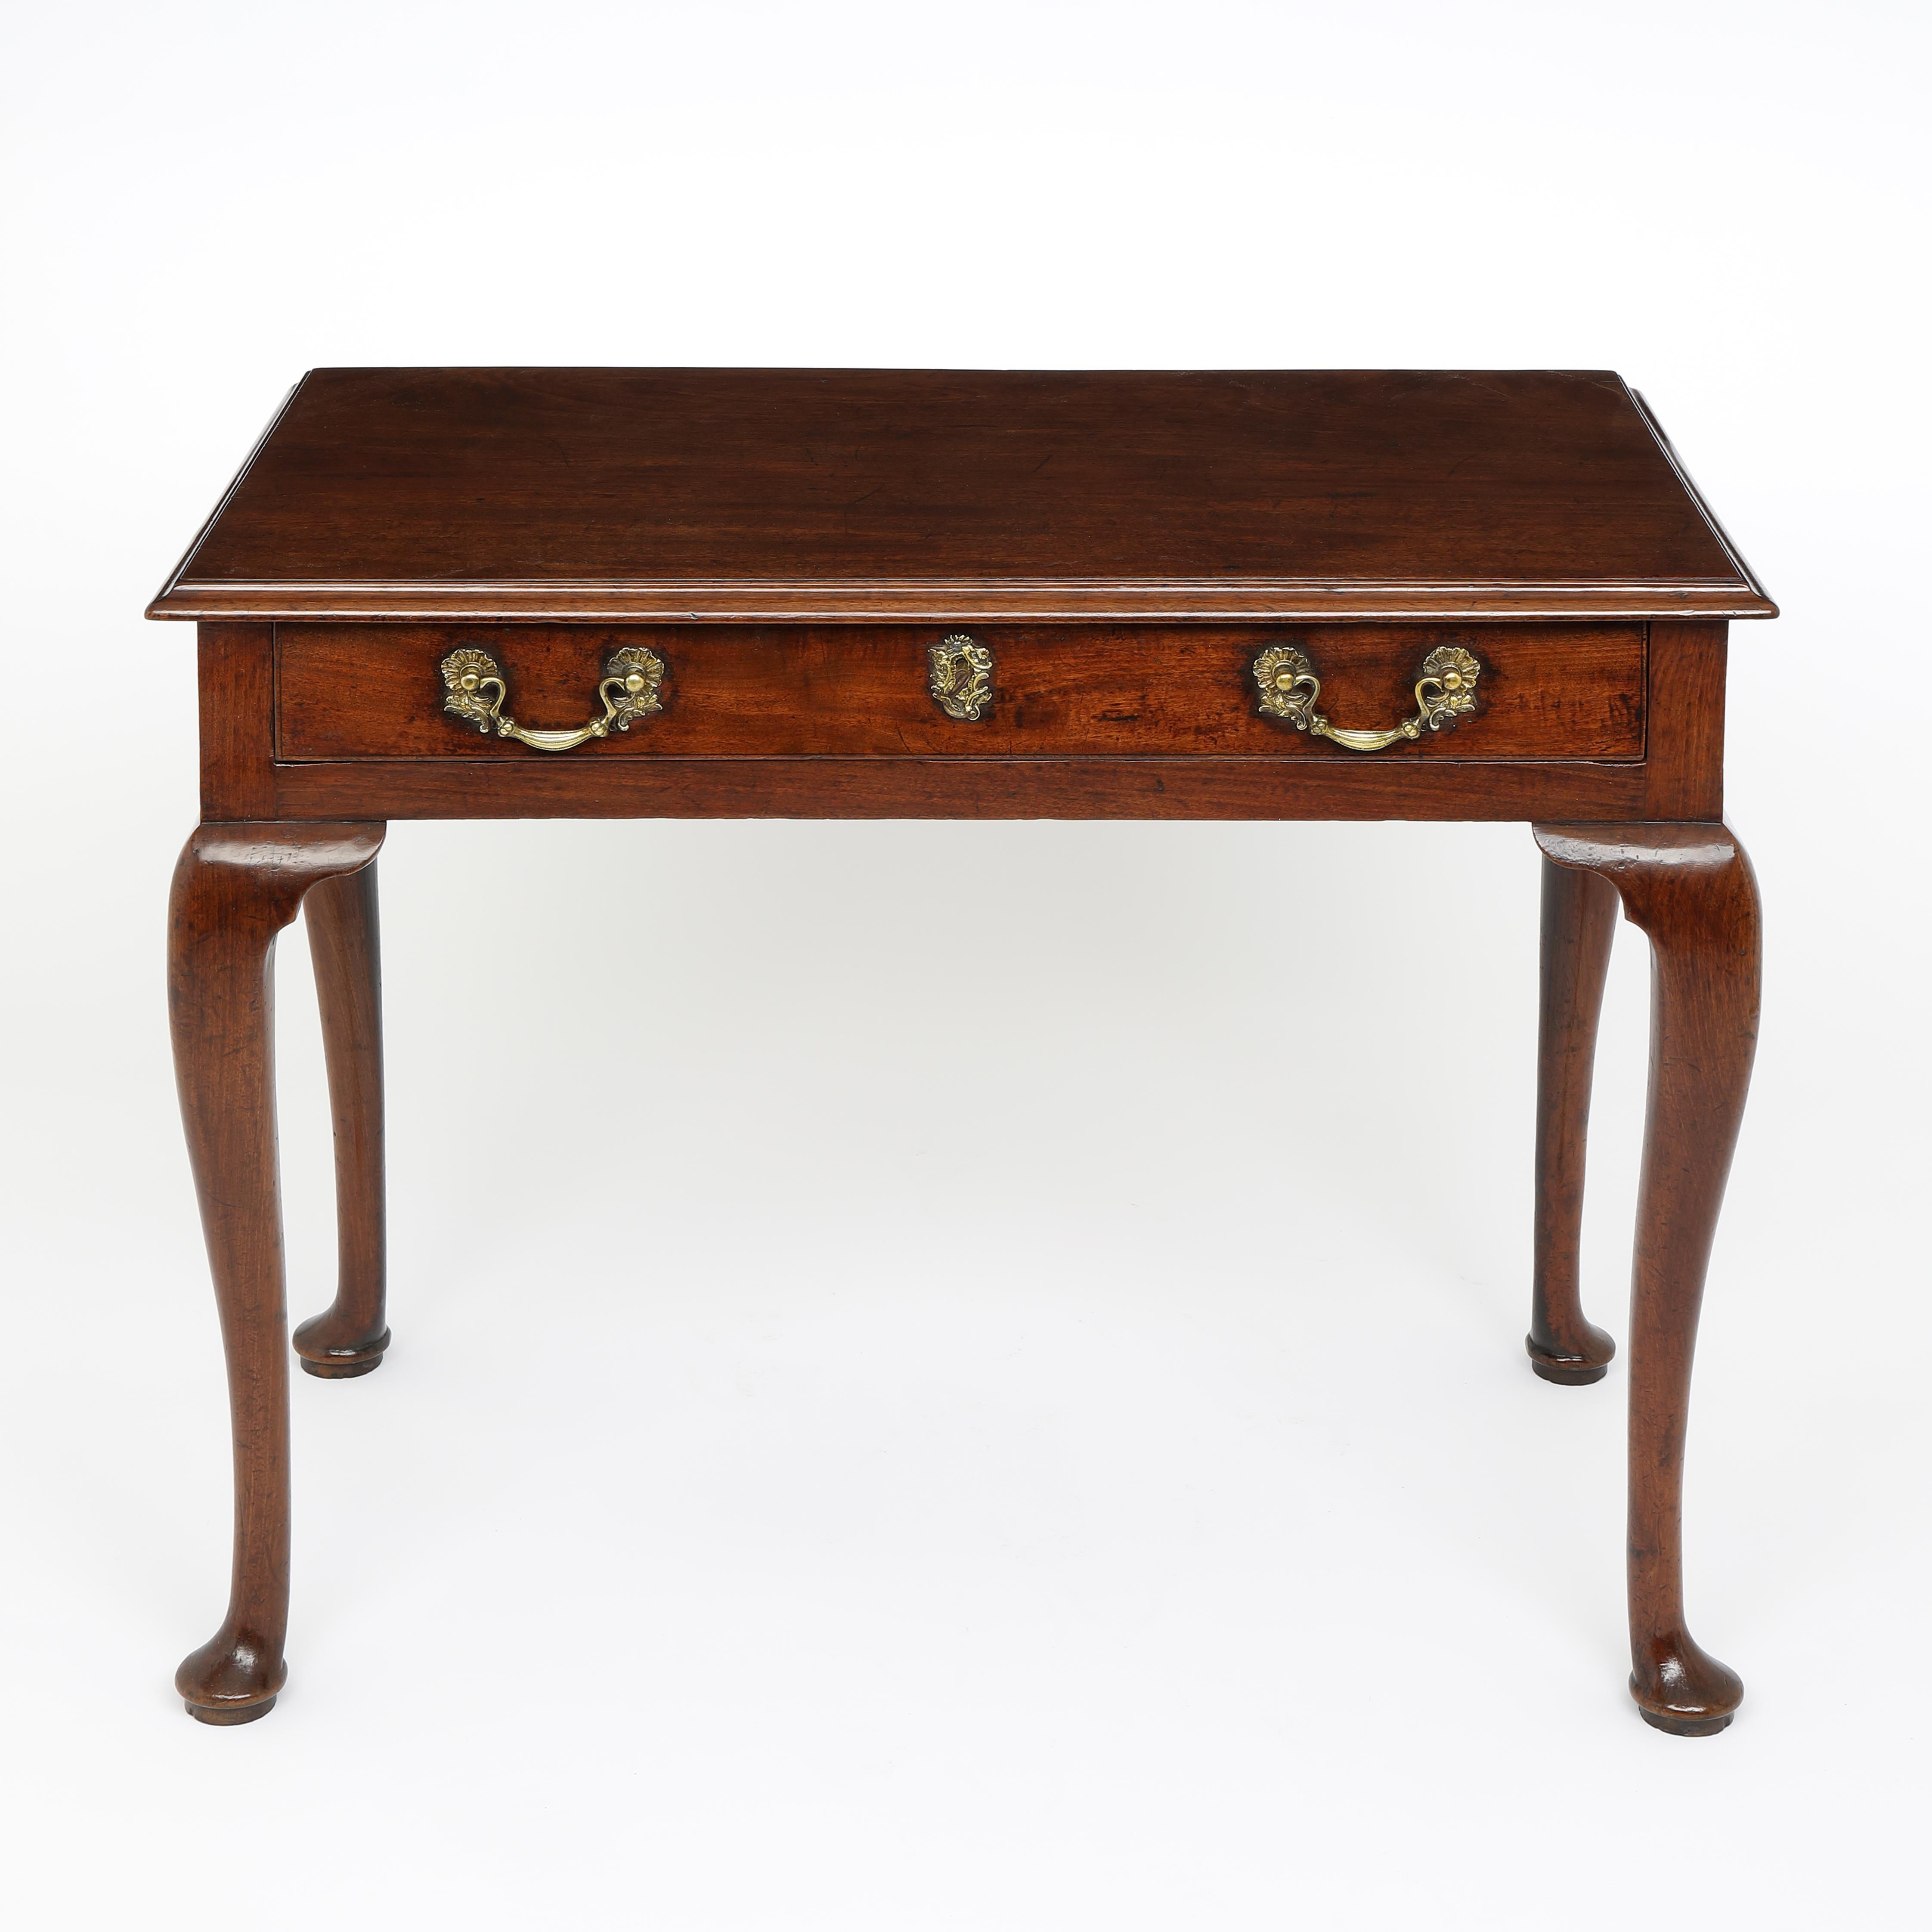 A fine quality George II period Cuban mahogany side table with single drawer below the moulded edge and standing of four well-drawn cabriole legs with pad feet.
In original condition with orginal handles, escutcheon amd and lock.